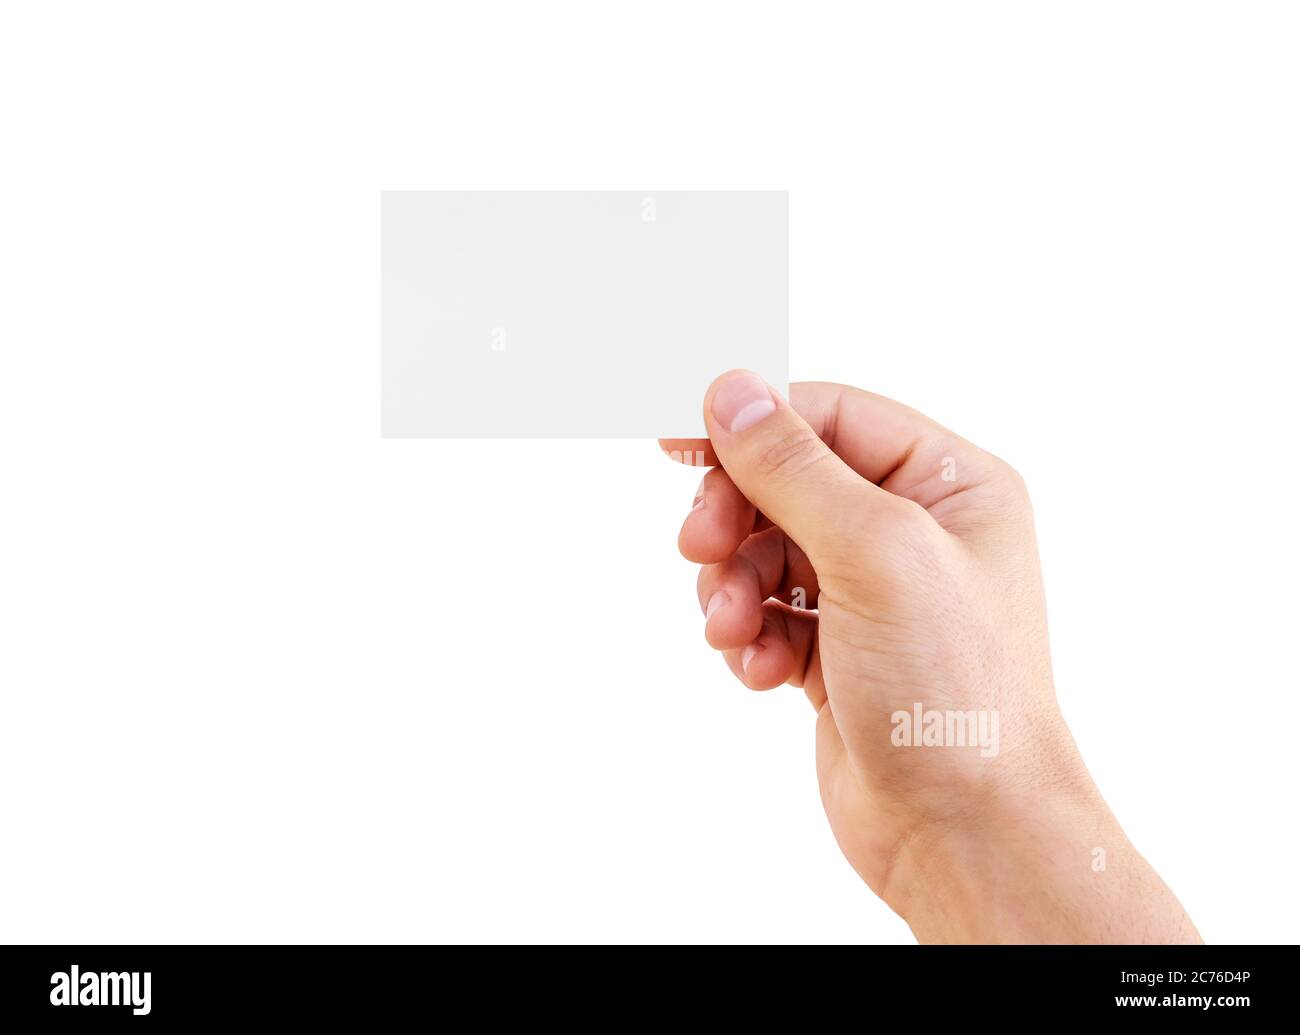 Man hand holding business card isolated on white background. Man hand holding white paper. Stock Photo